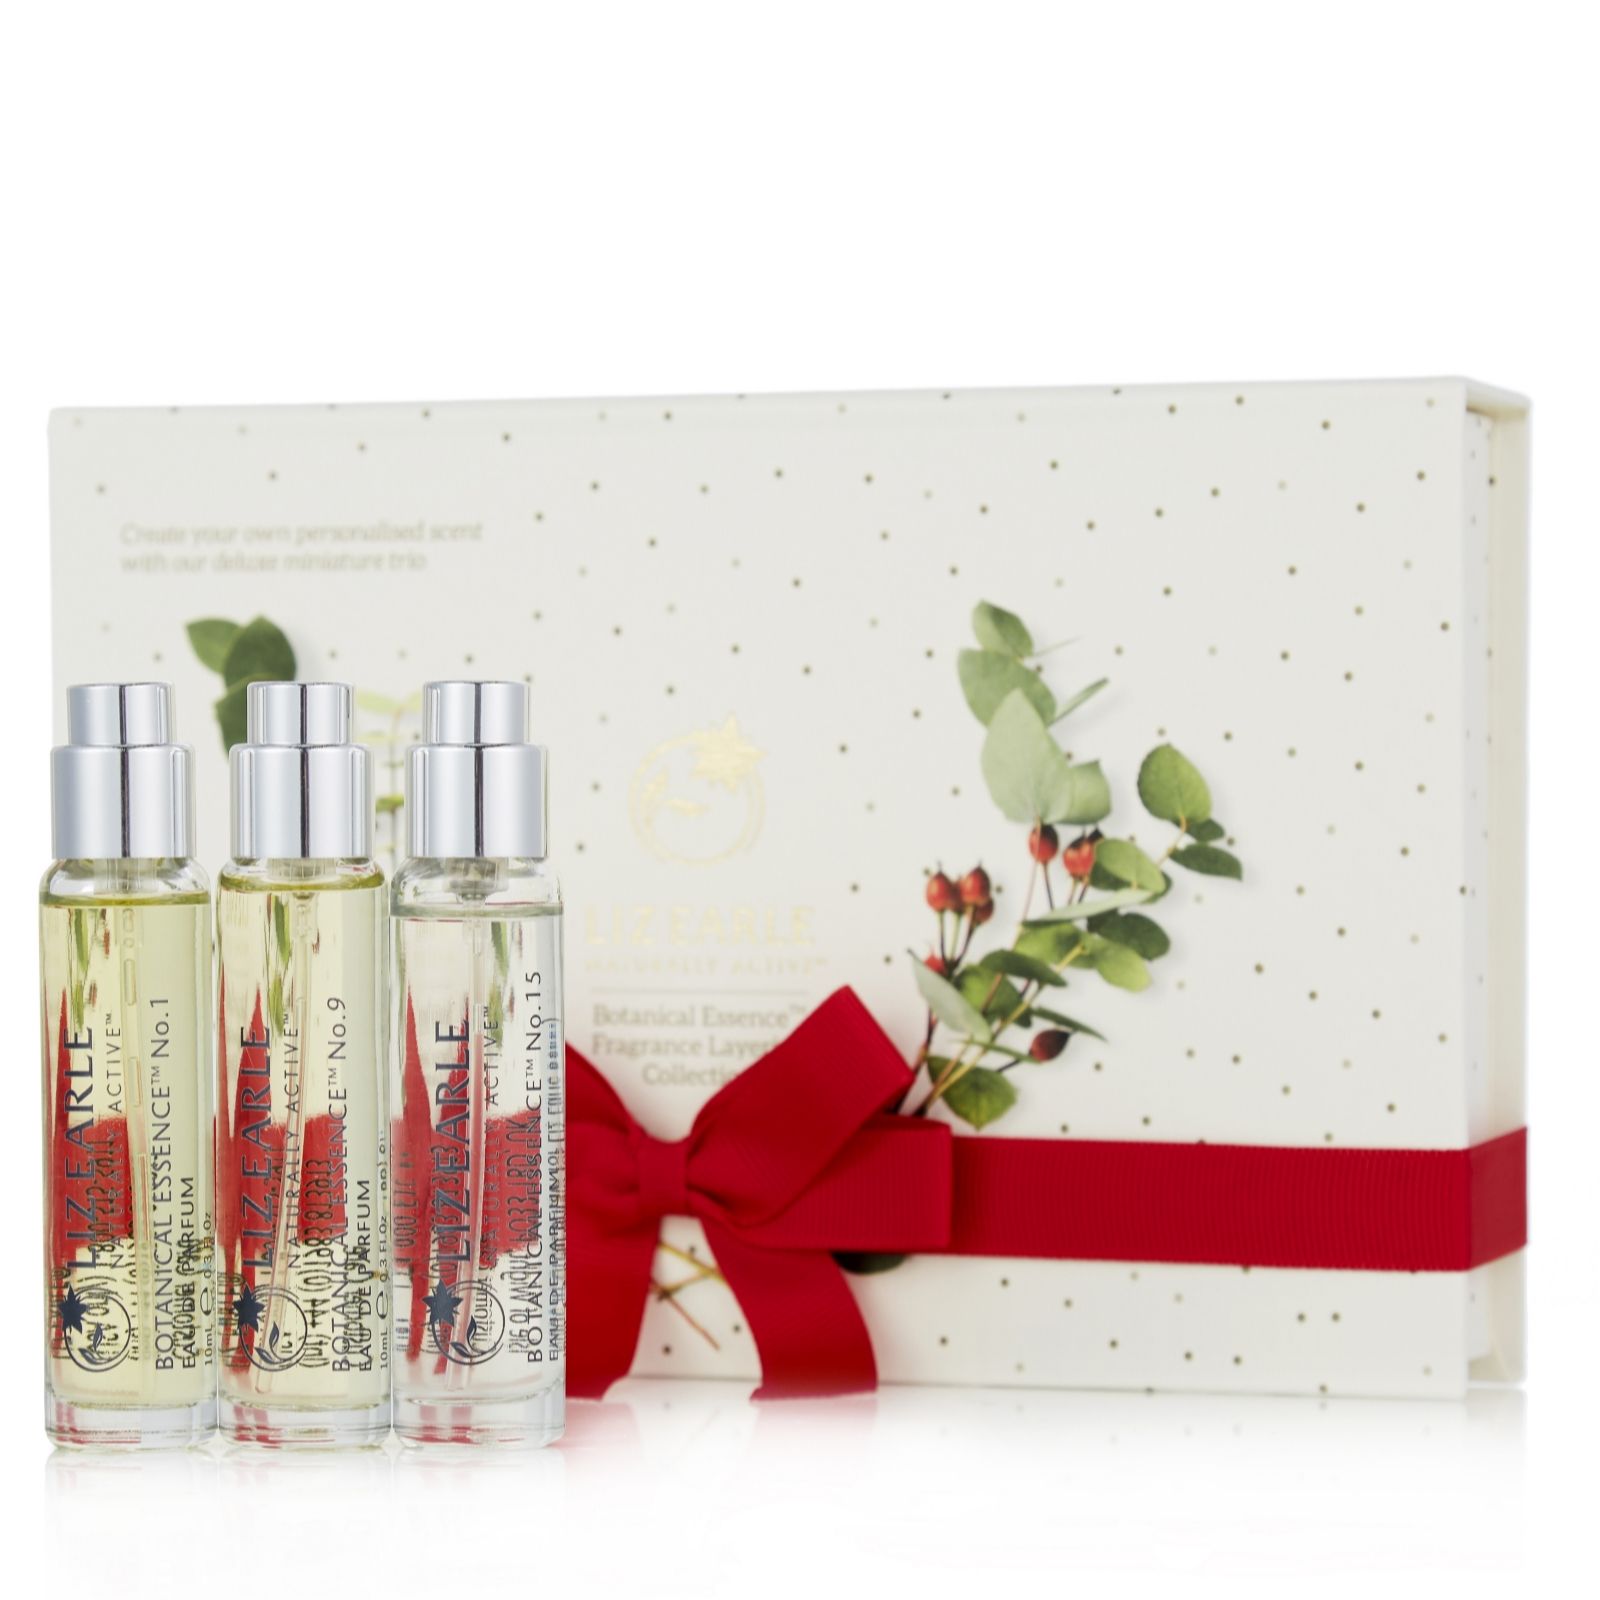 Liz Earle Botanical Essence The Art of Layering Collection